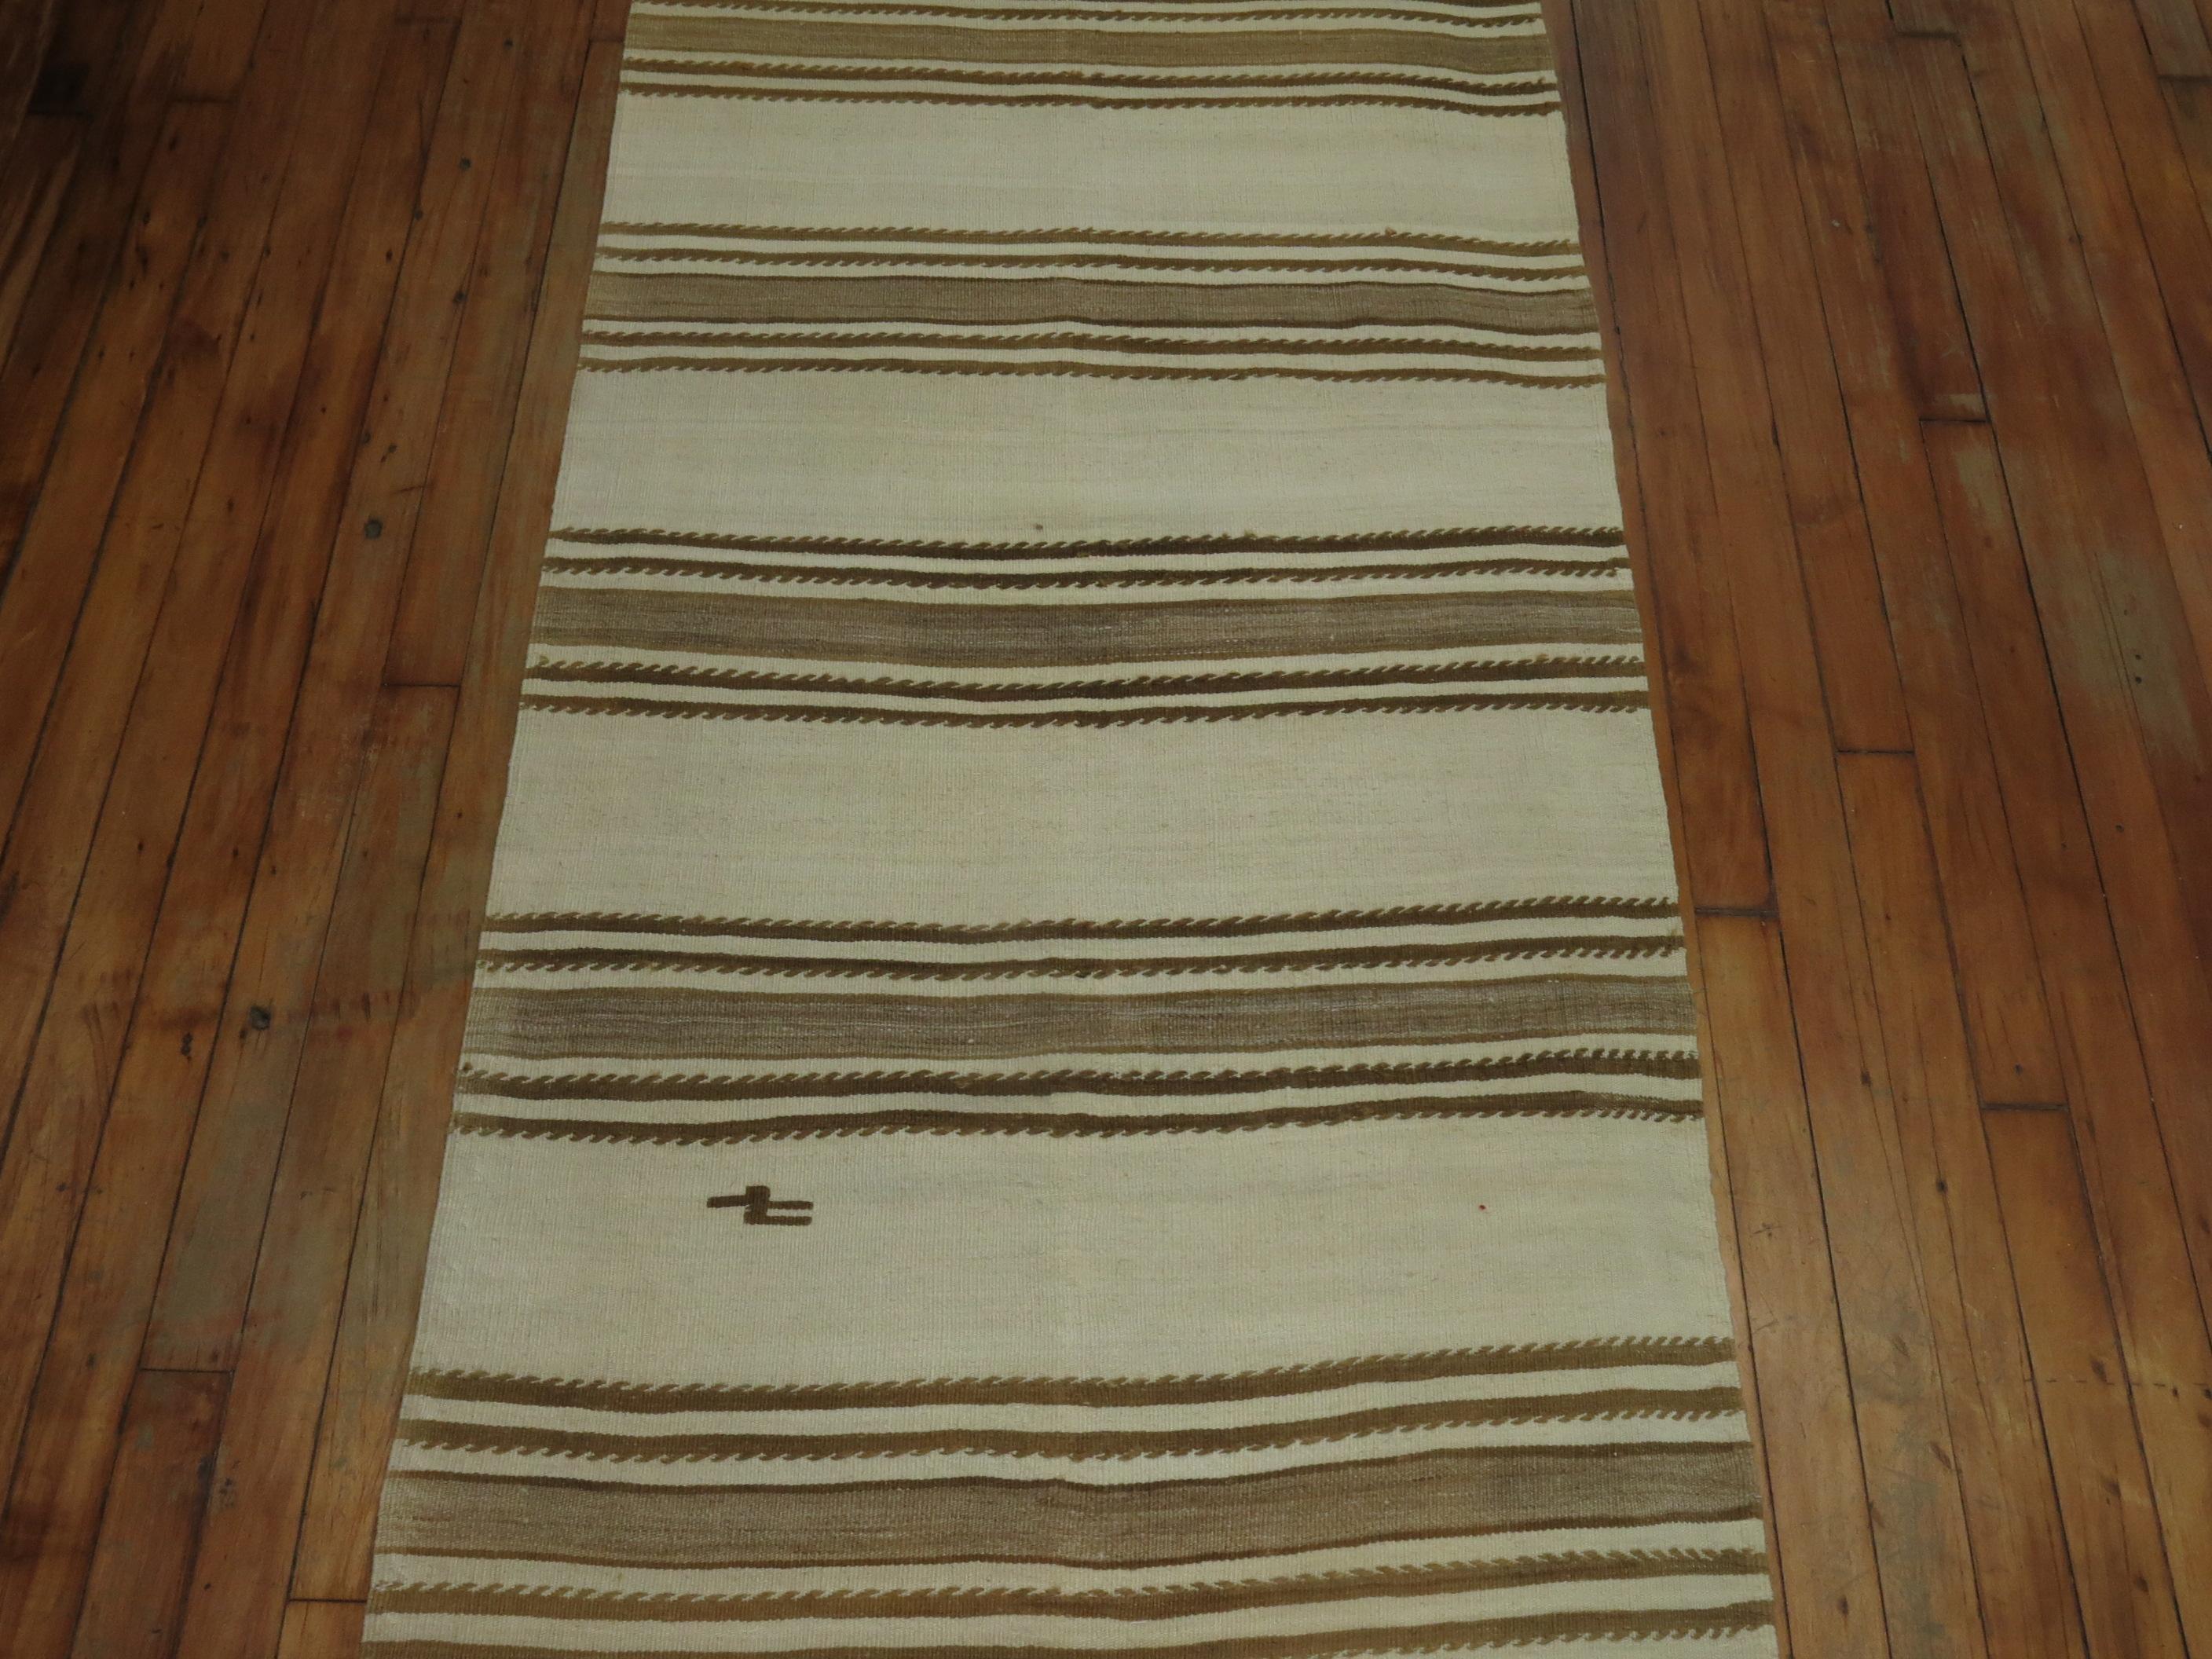 Rare narrow and long striped Kilim runner in white and brown.